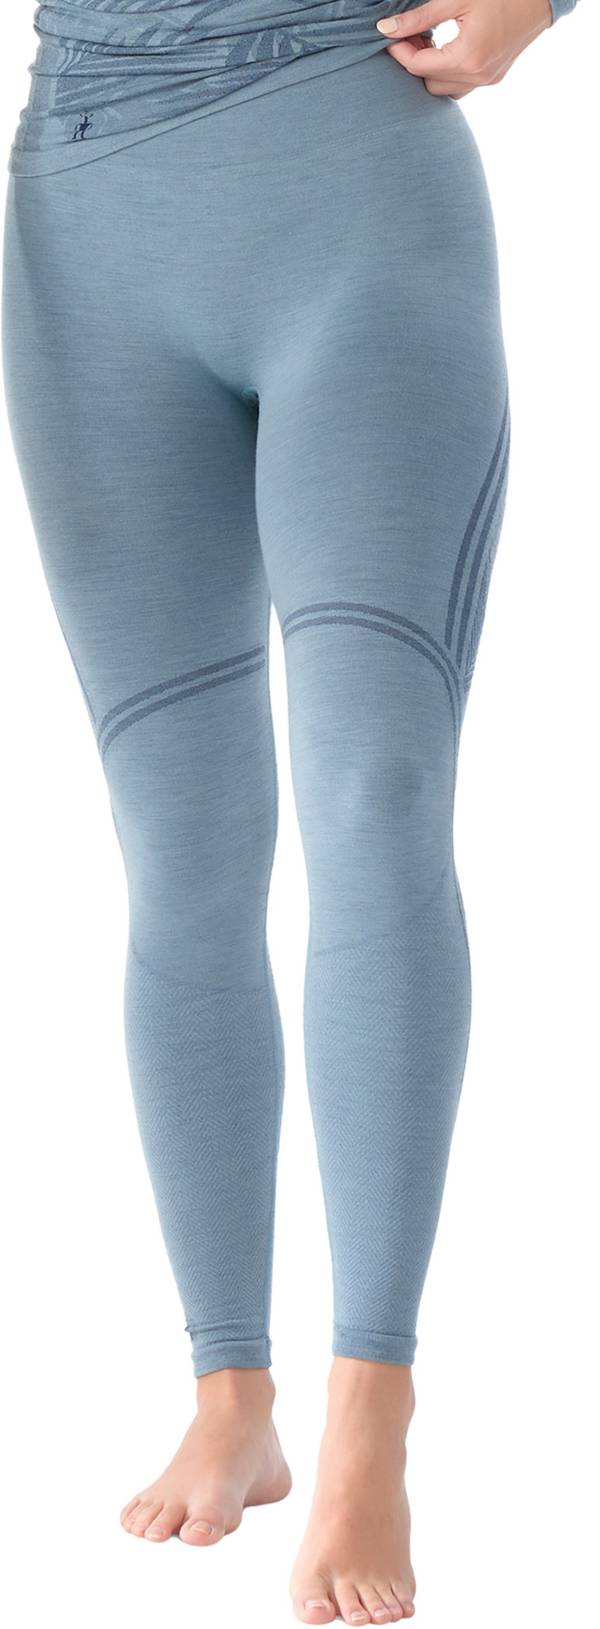 SmartWool Women's Intraknit Active Base Layer Bottoms product image